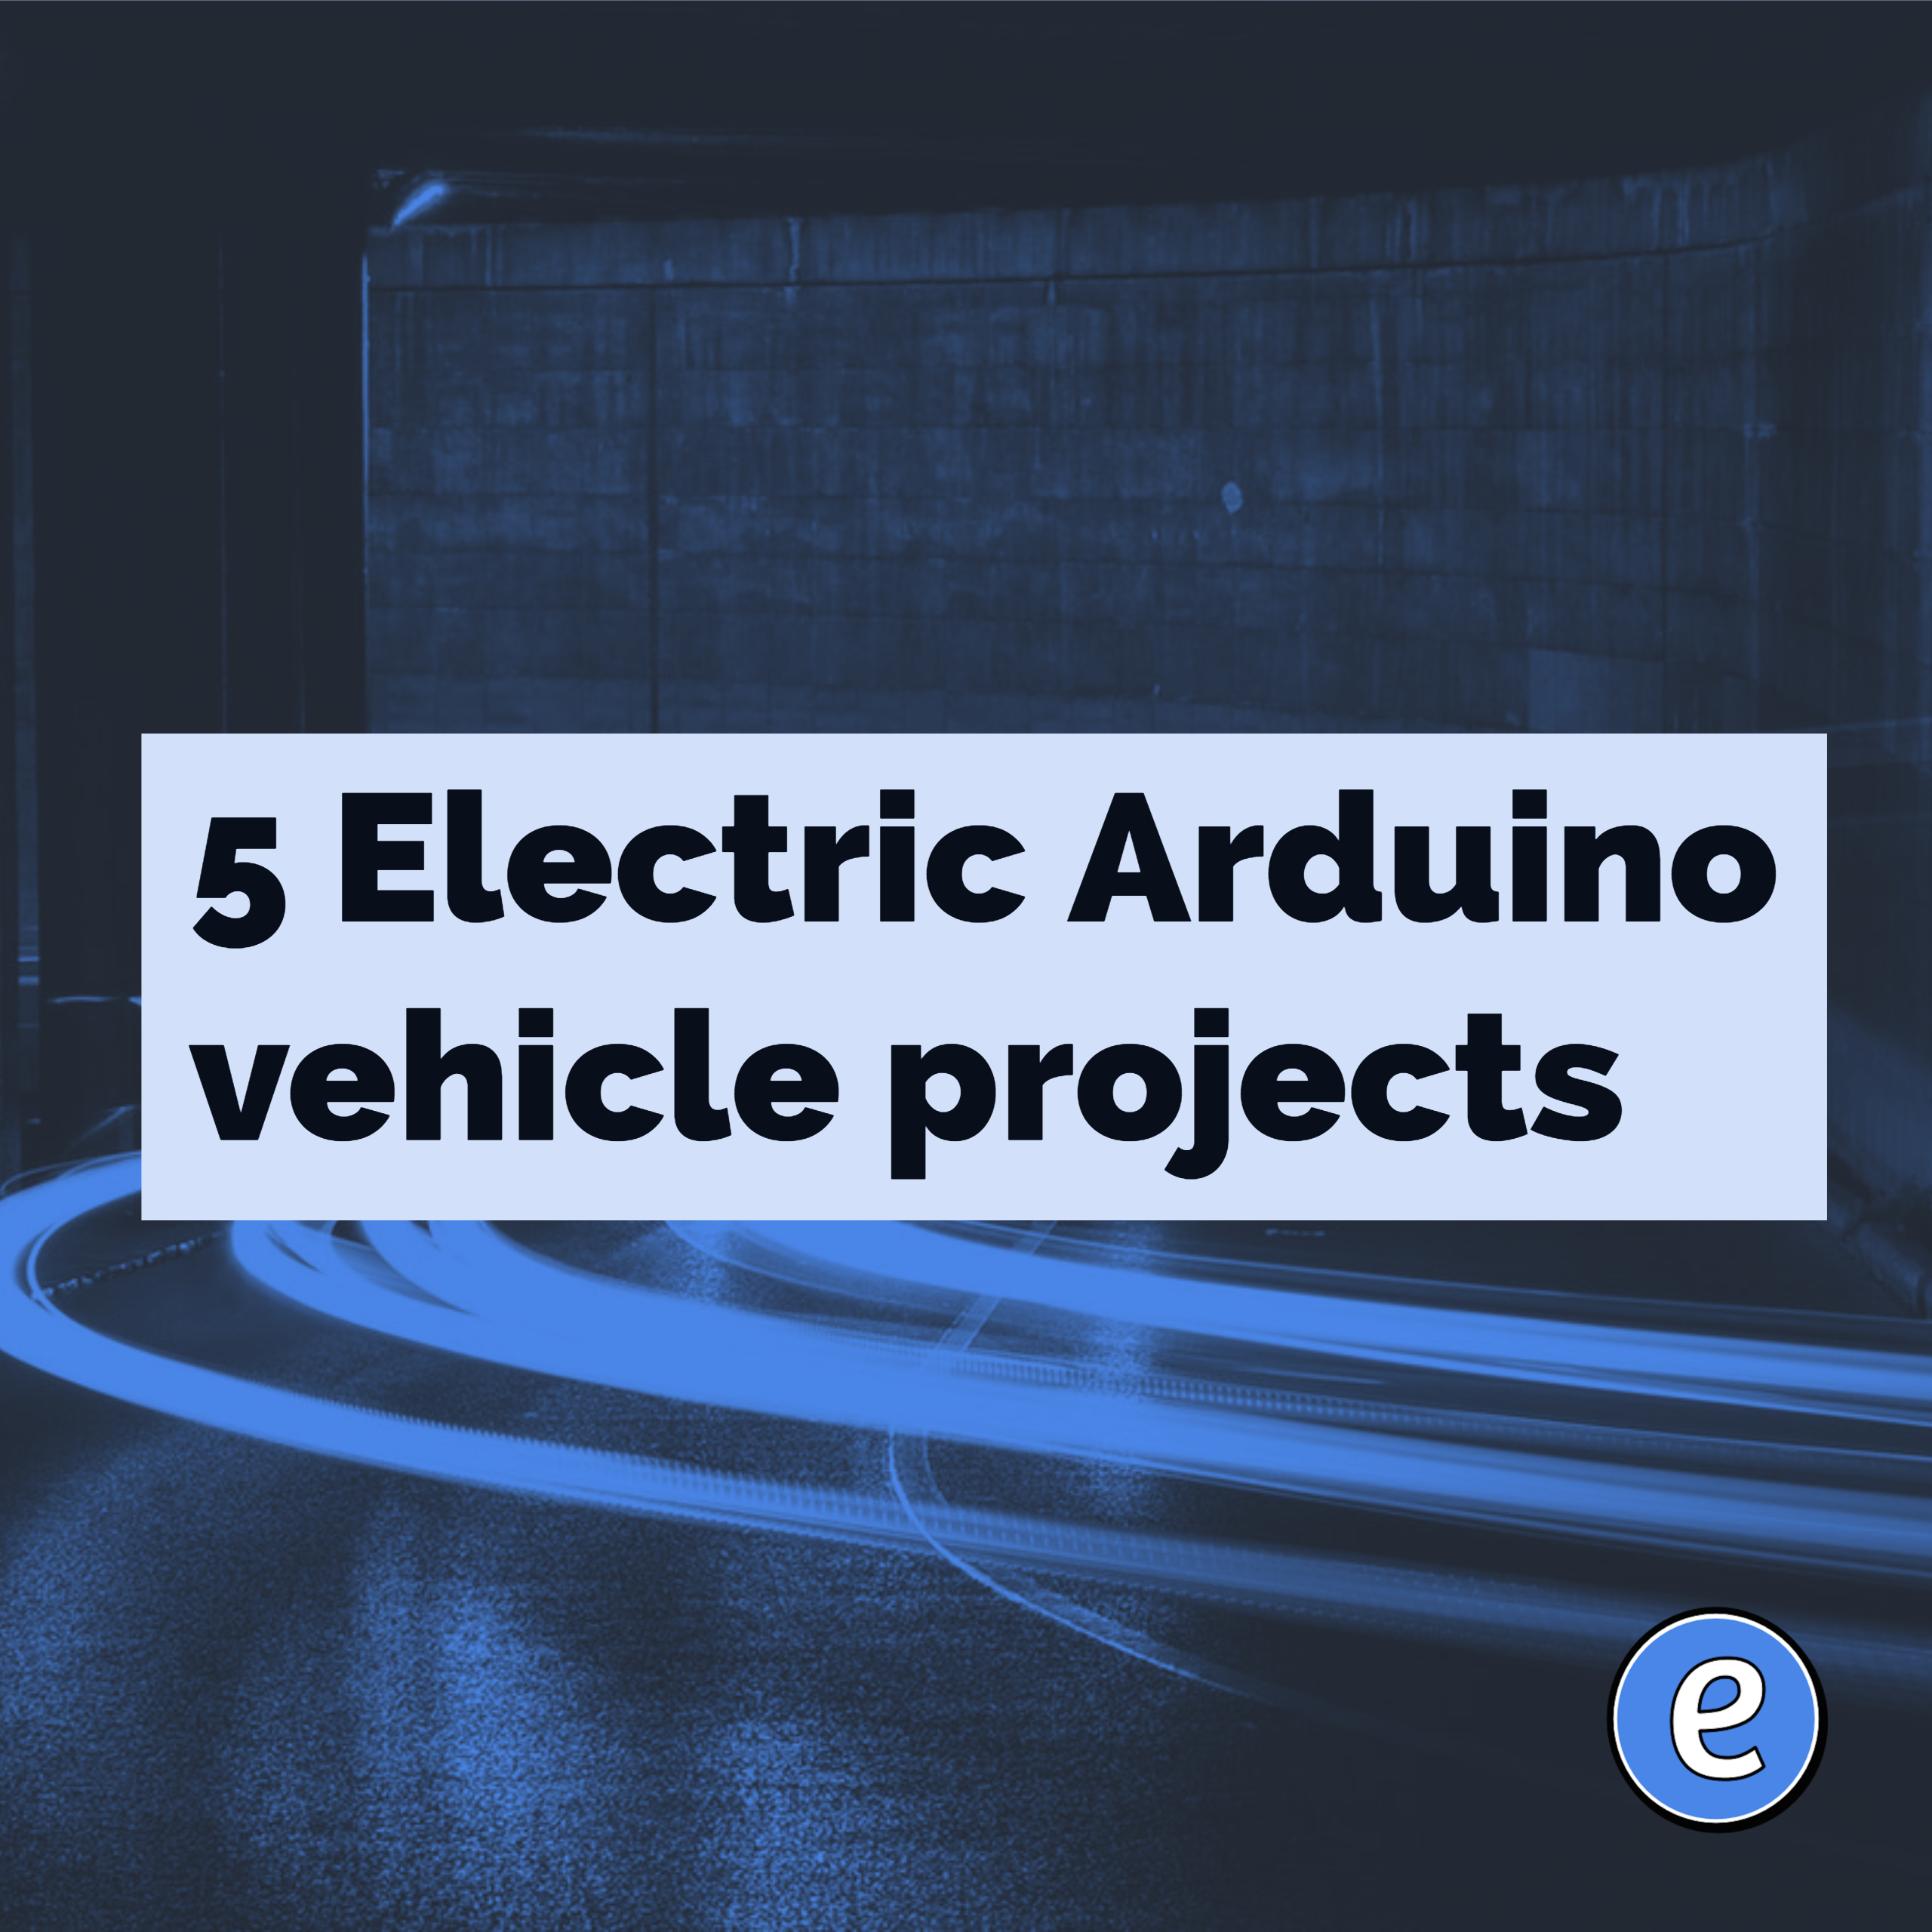 5 Electric Arduino vehicle projects